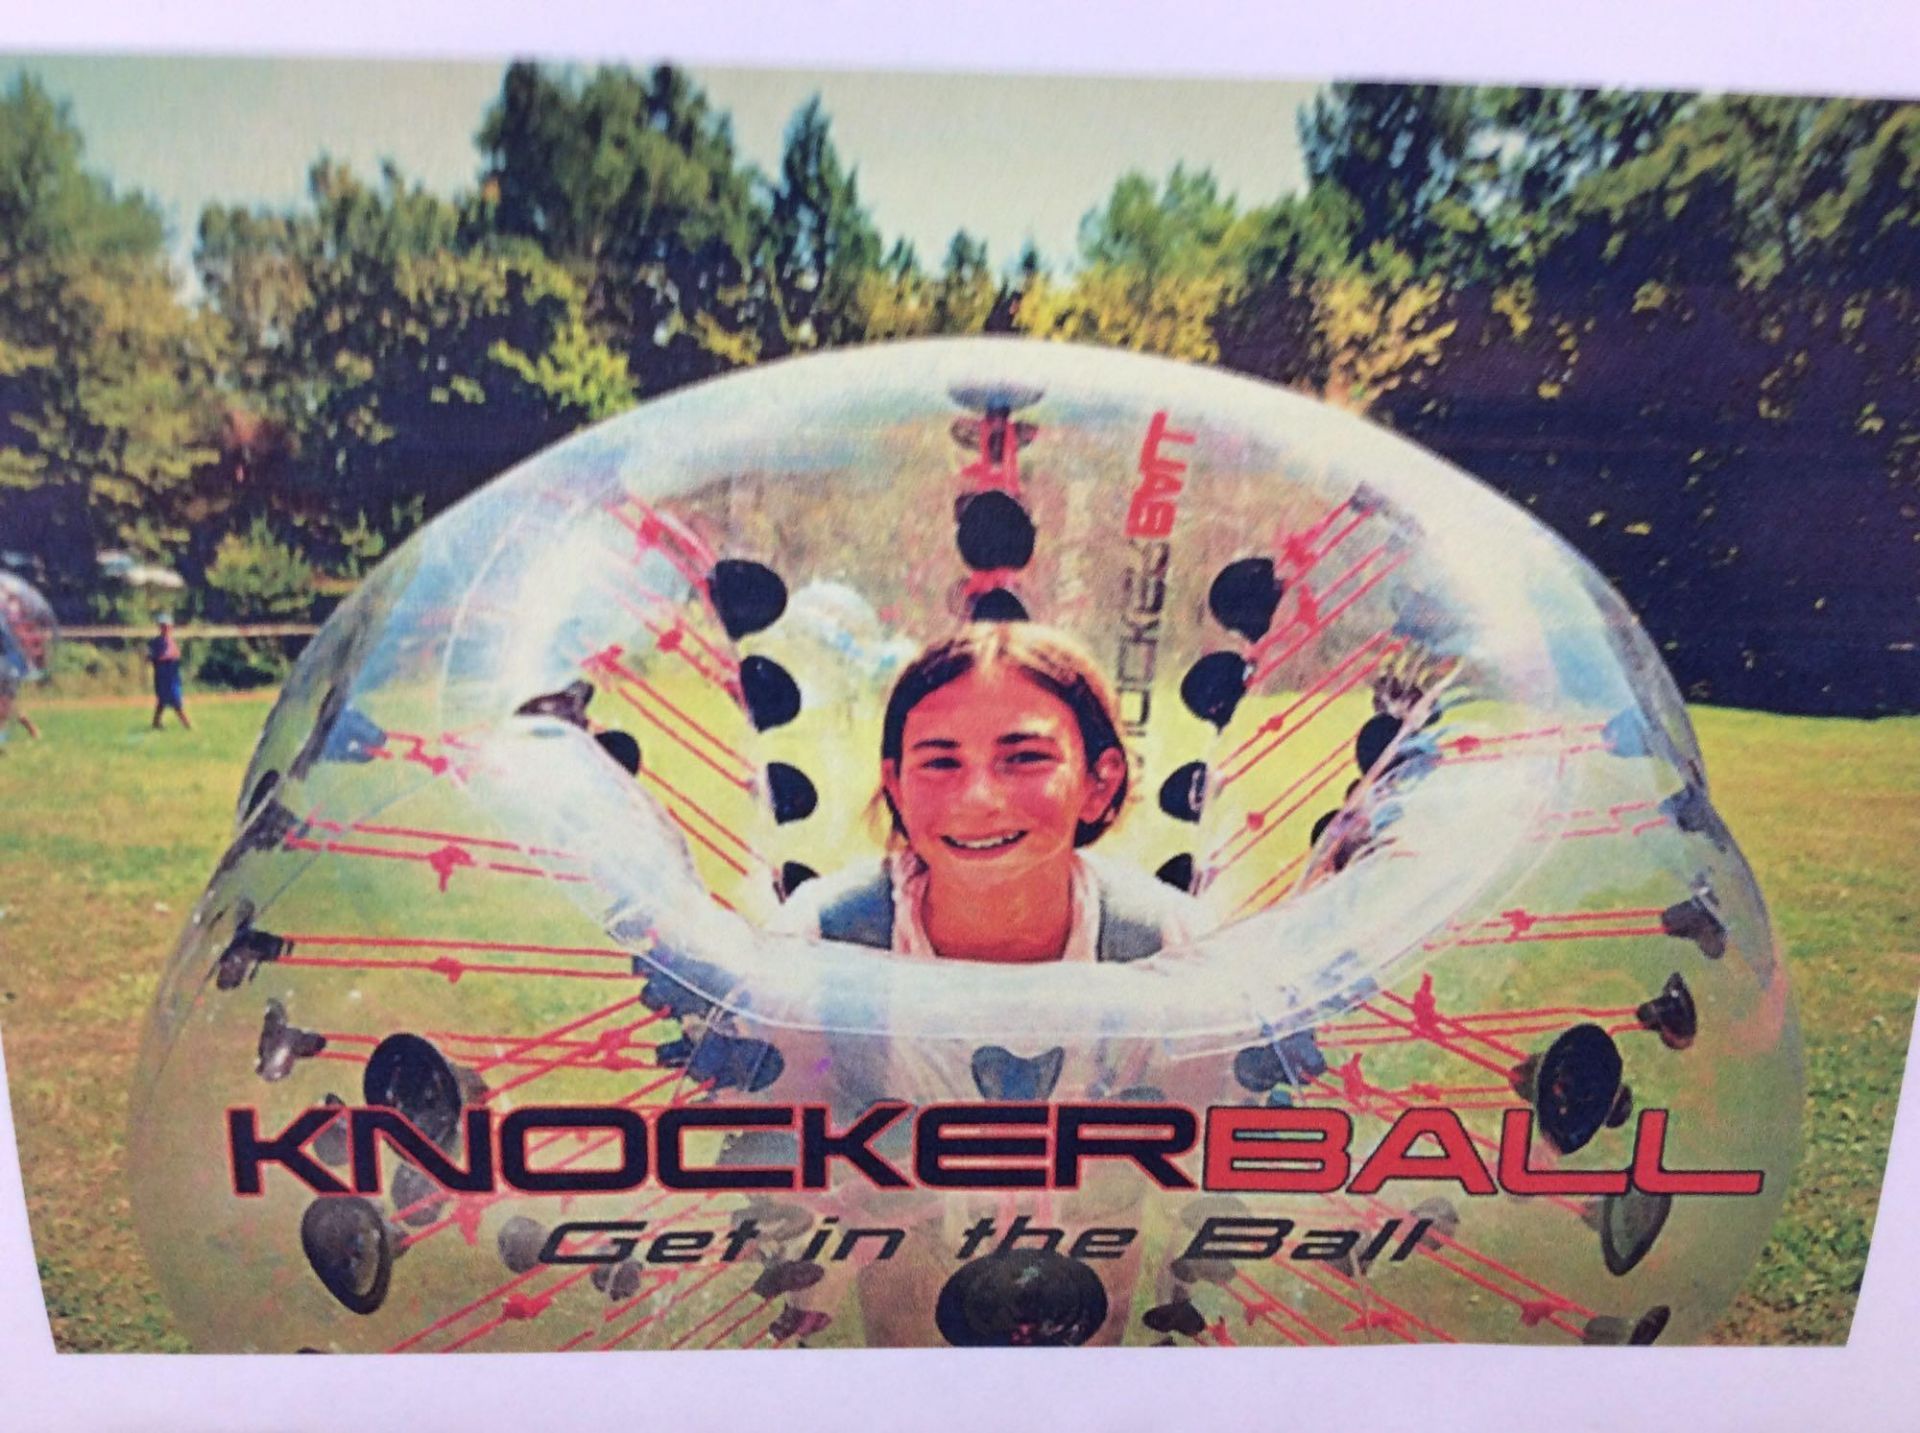 Lot of (4) Knockerballs, size large, red panel - new in the box! (Cost $1200)